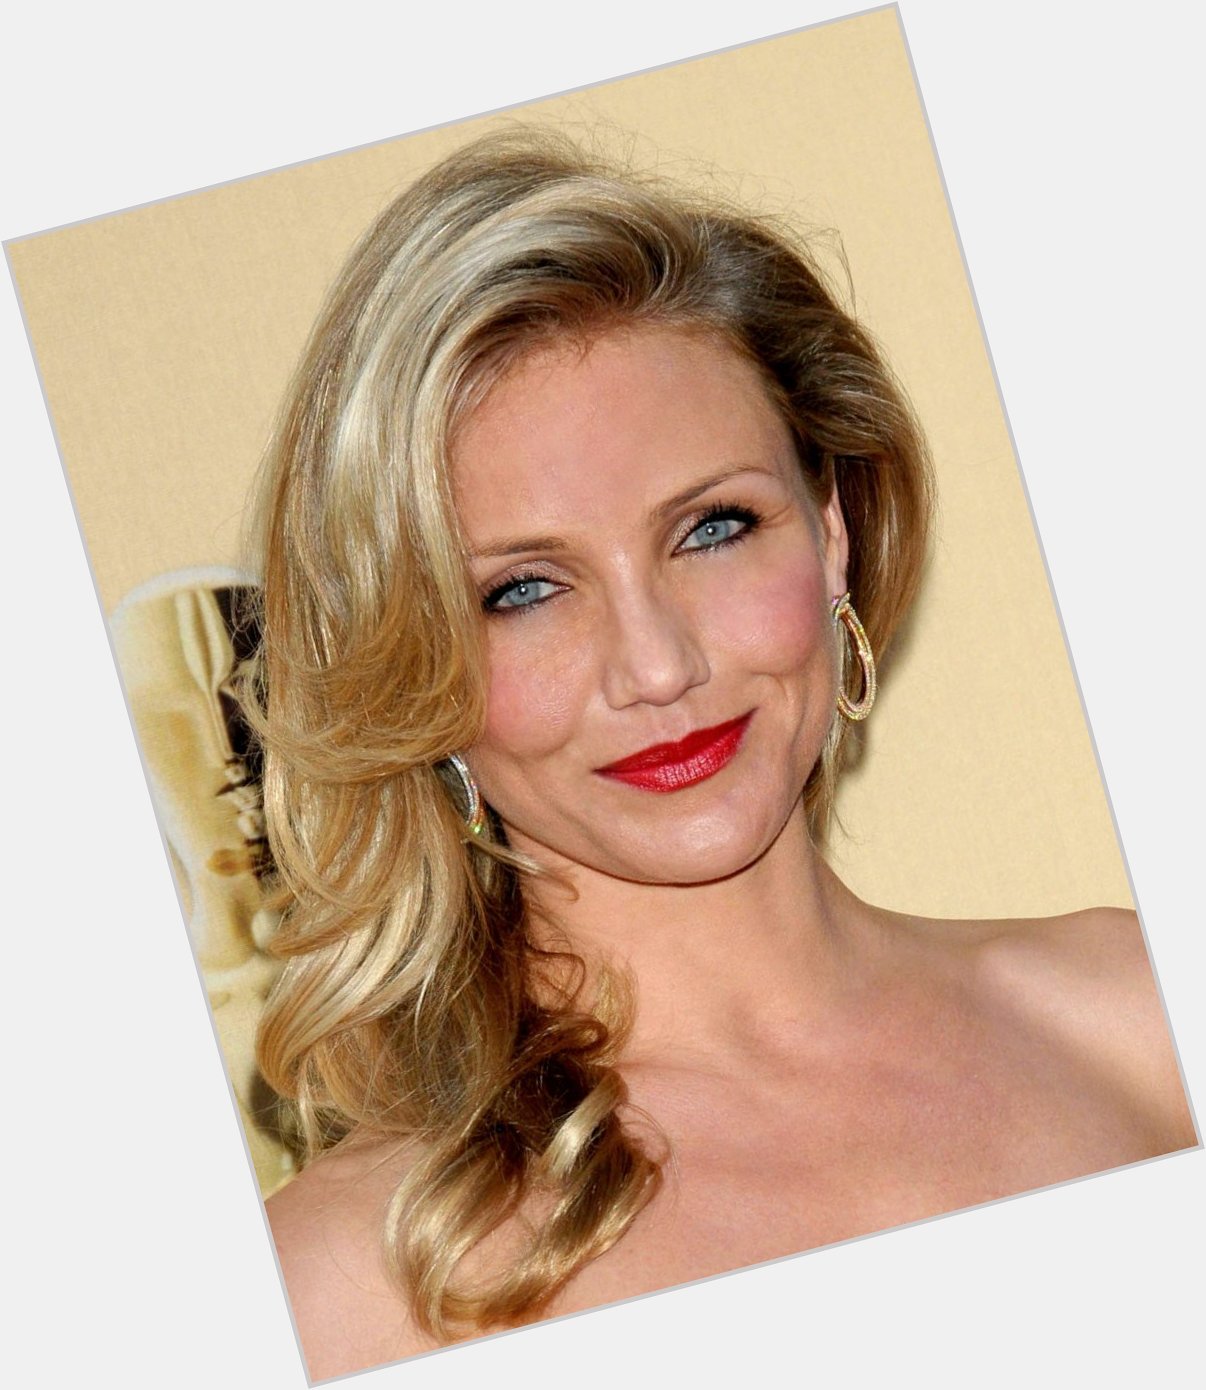 Cameron Diaz August 30 Sending Very Happy Birthday Wishes! All the Best! 